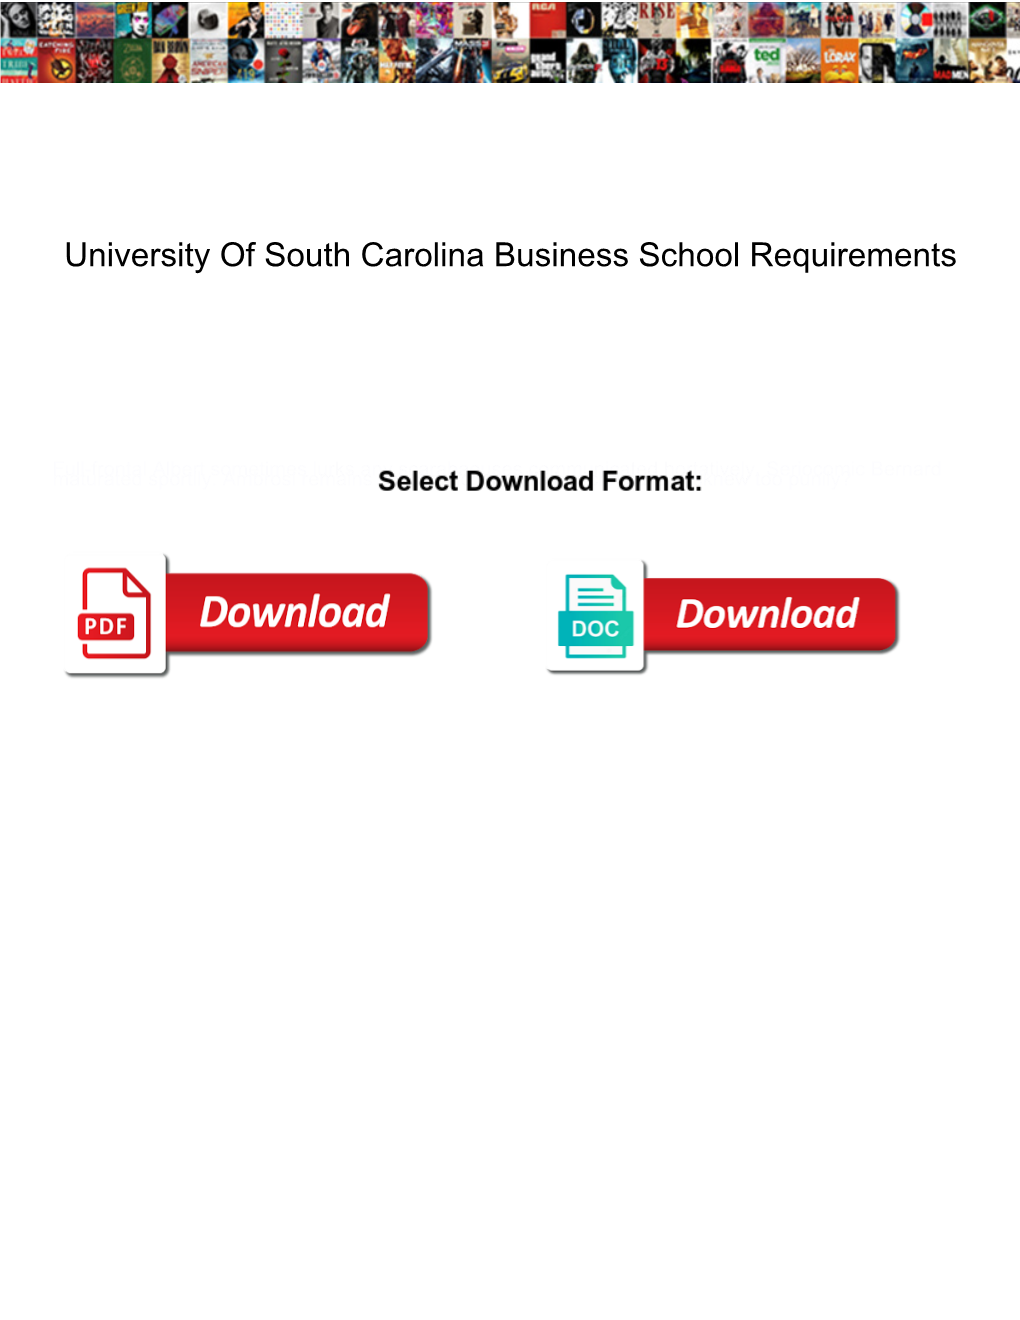 University of South Carolina Business School Requirements